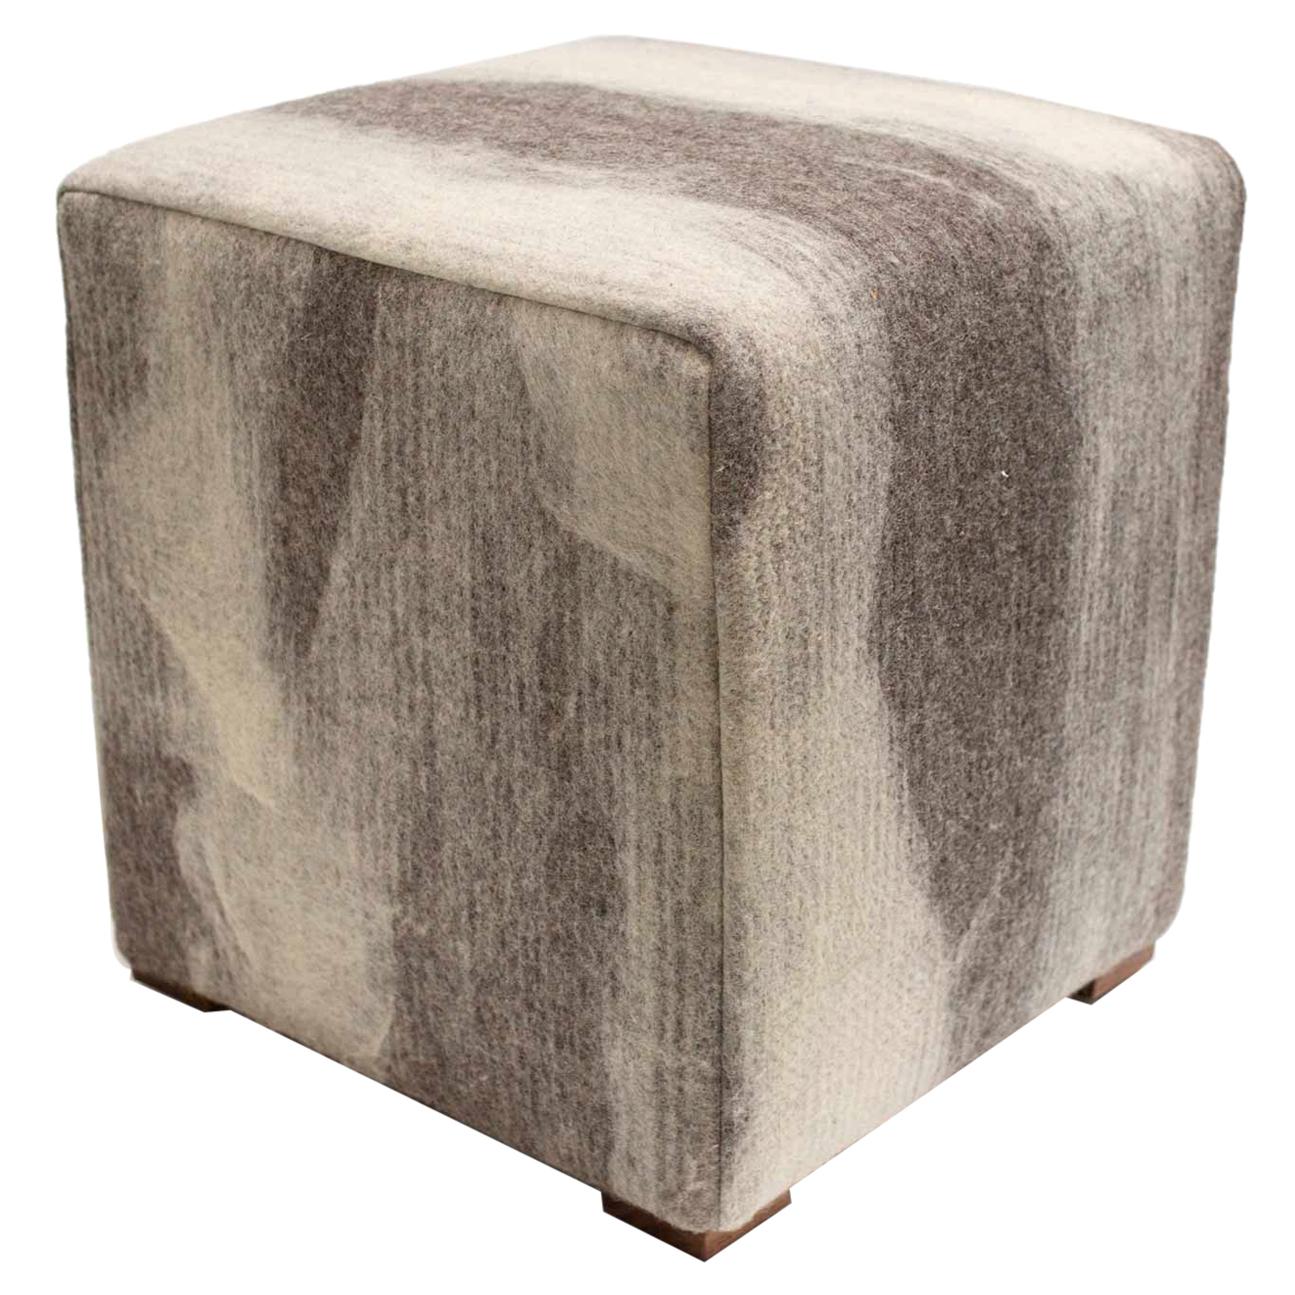 Sheep Cube in Redwood & Grey, Felted Wool by JG Switzer In New Condition For Sale In Sebastopol, CA